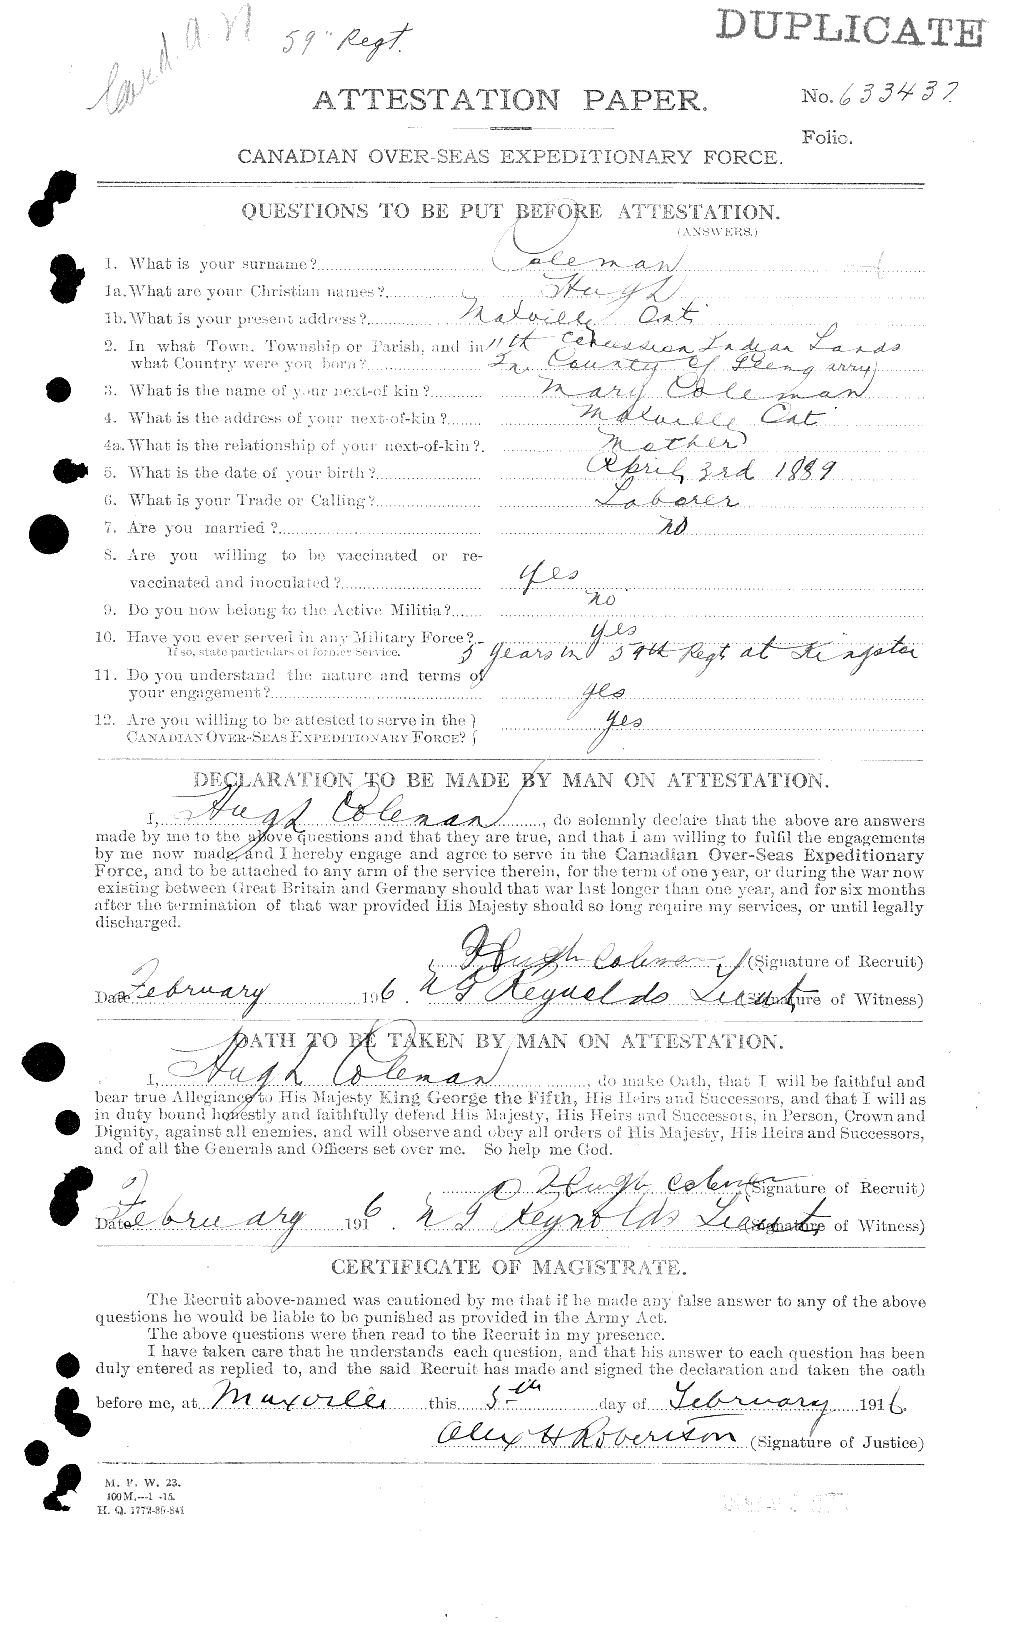 Personnel Records of the First World War - CEF 028180a